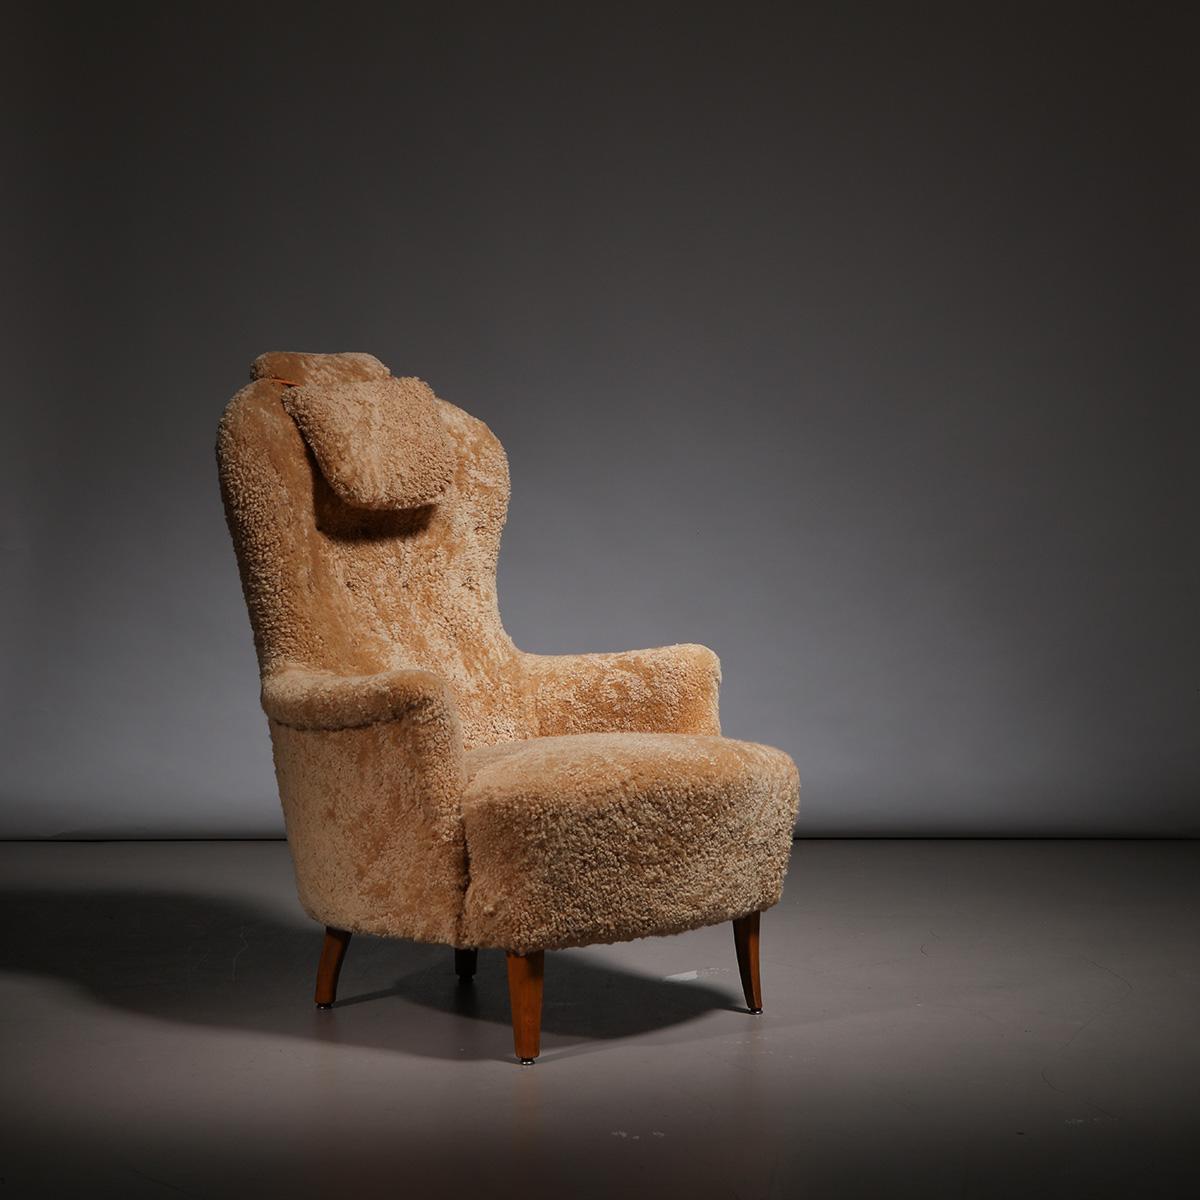 Armchair in honey sheepskin, model “Farmor”, designed by the Swedish designer Carl Malmsten and manufactured by O.H. Sjögren in Sweden, 1950s.

The iconic 